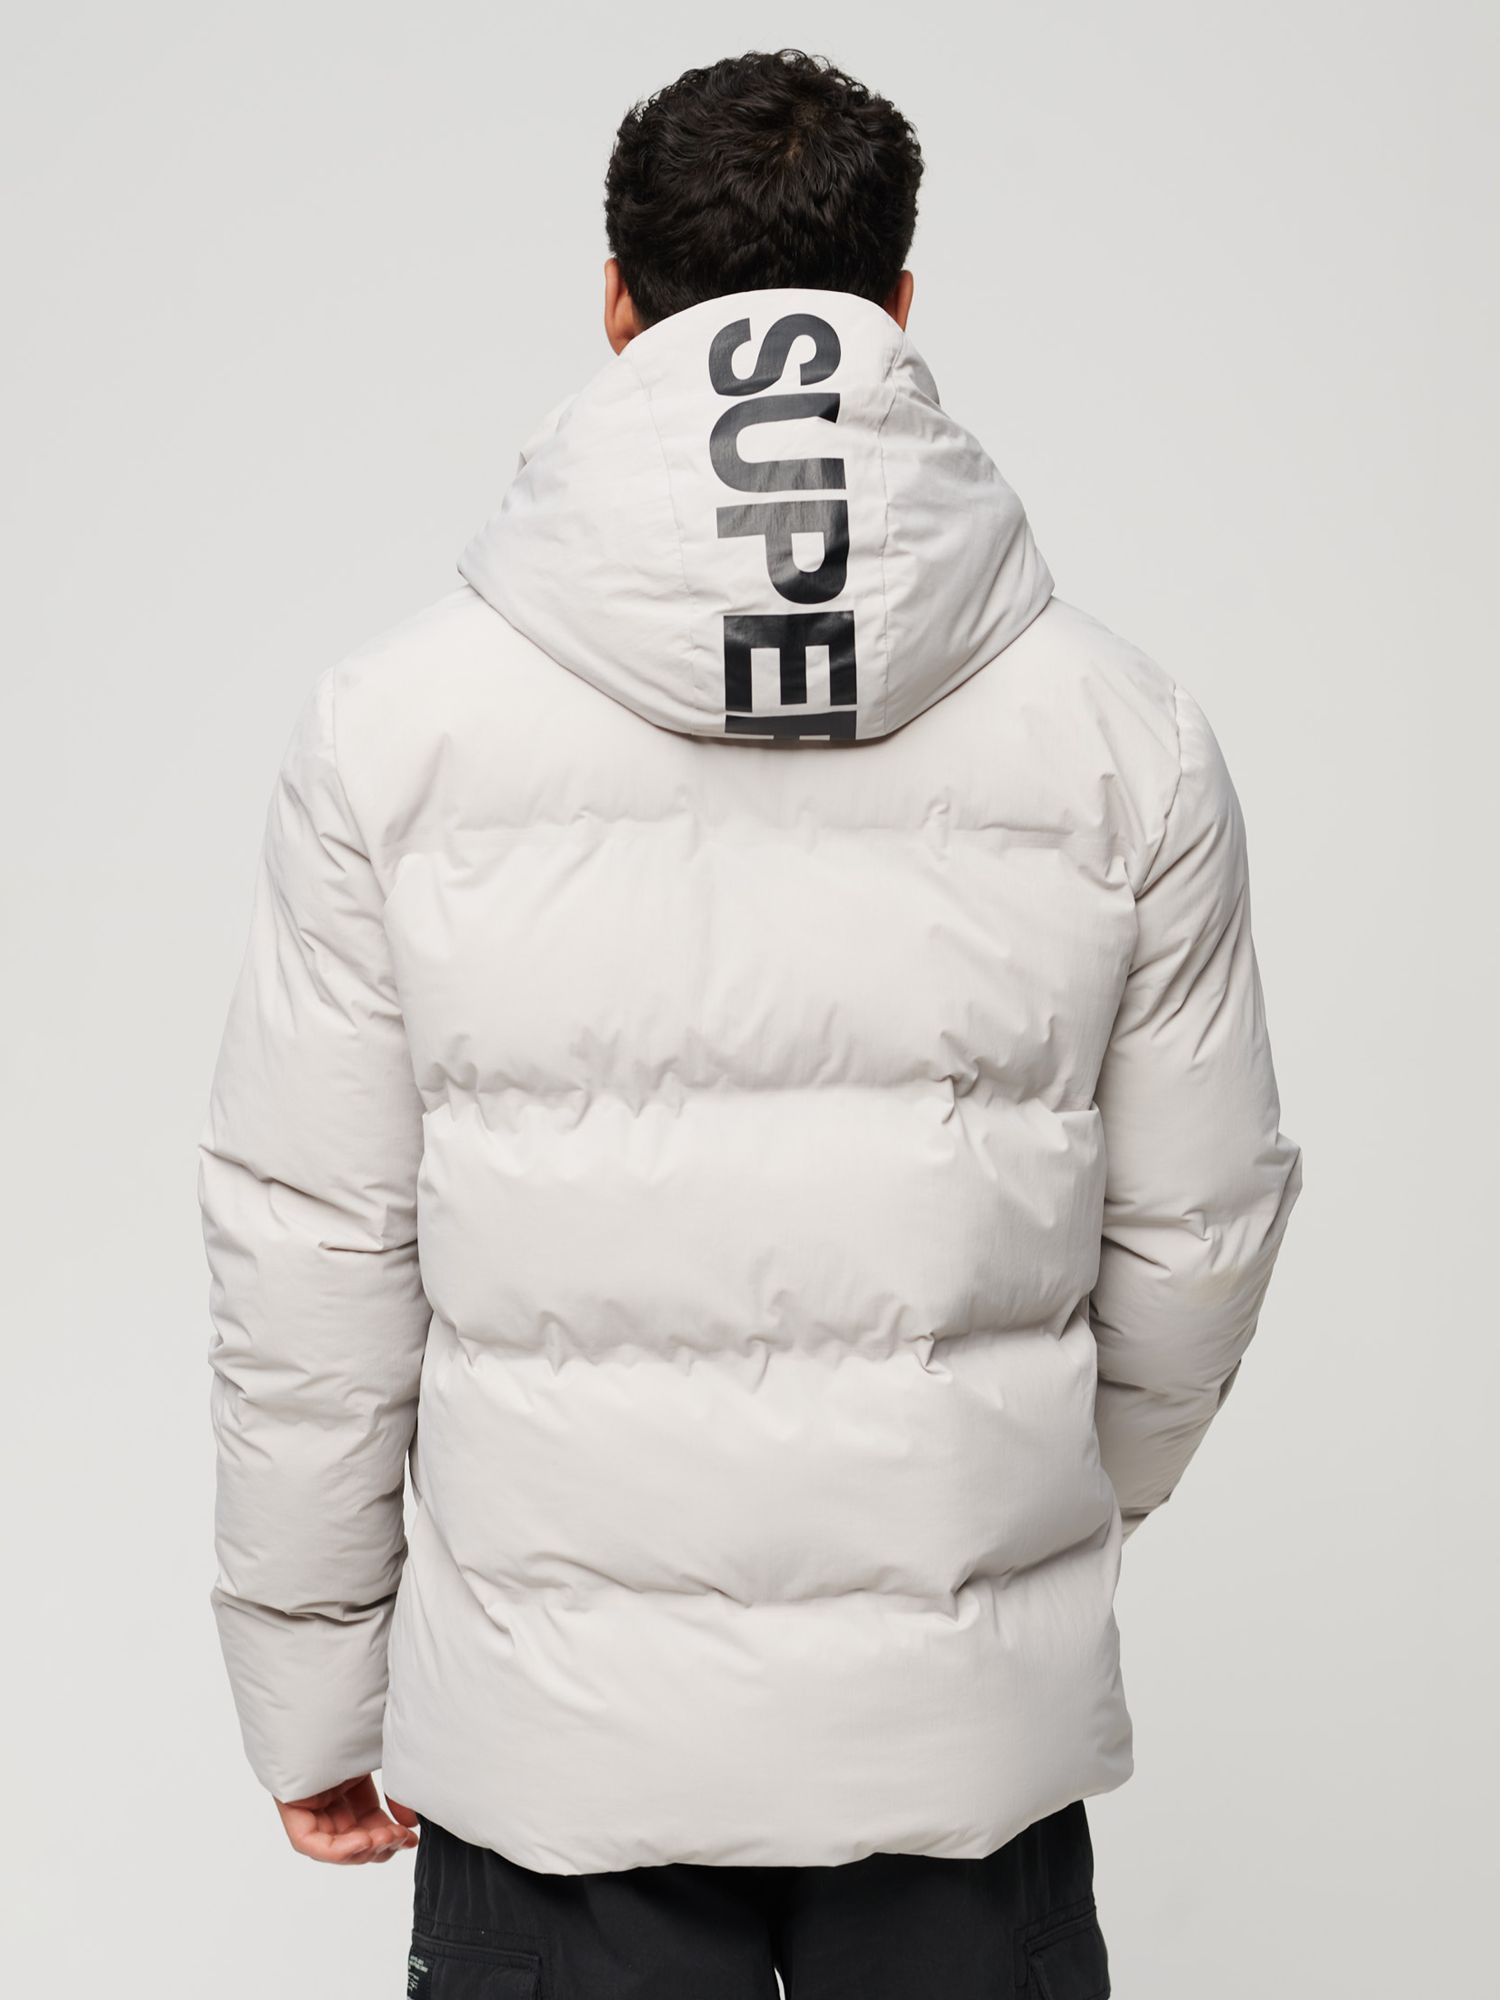 Superdry Hooded Boxy Puffer John & Moonlight Partners Jacket, Grey at Lewis